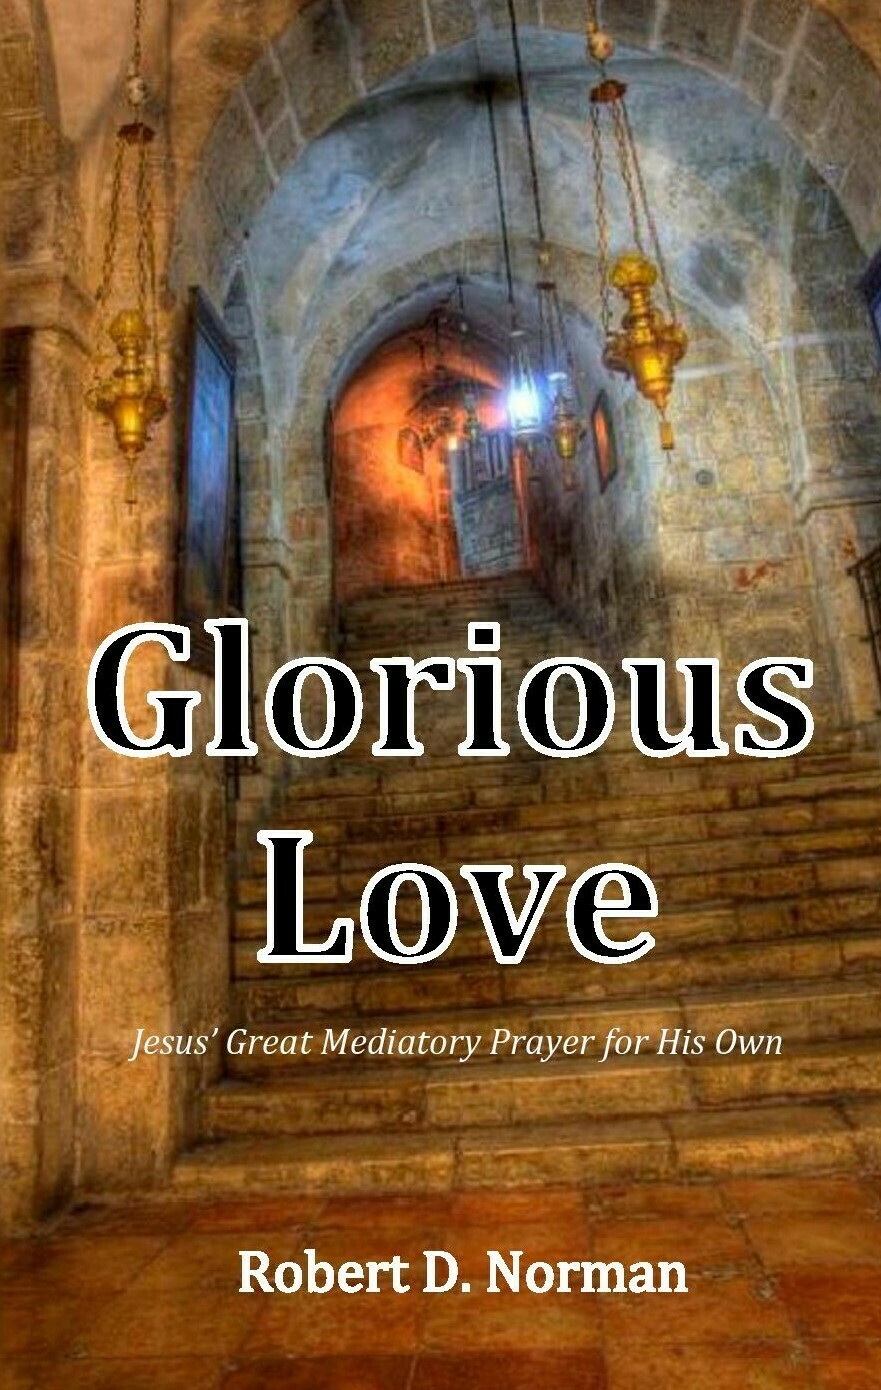 Glorious Love: Jesus' Great Mediatory Prayer for His Own by Robert D. Norman (Soft-Cover & E-Book)